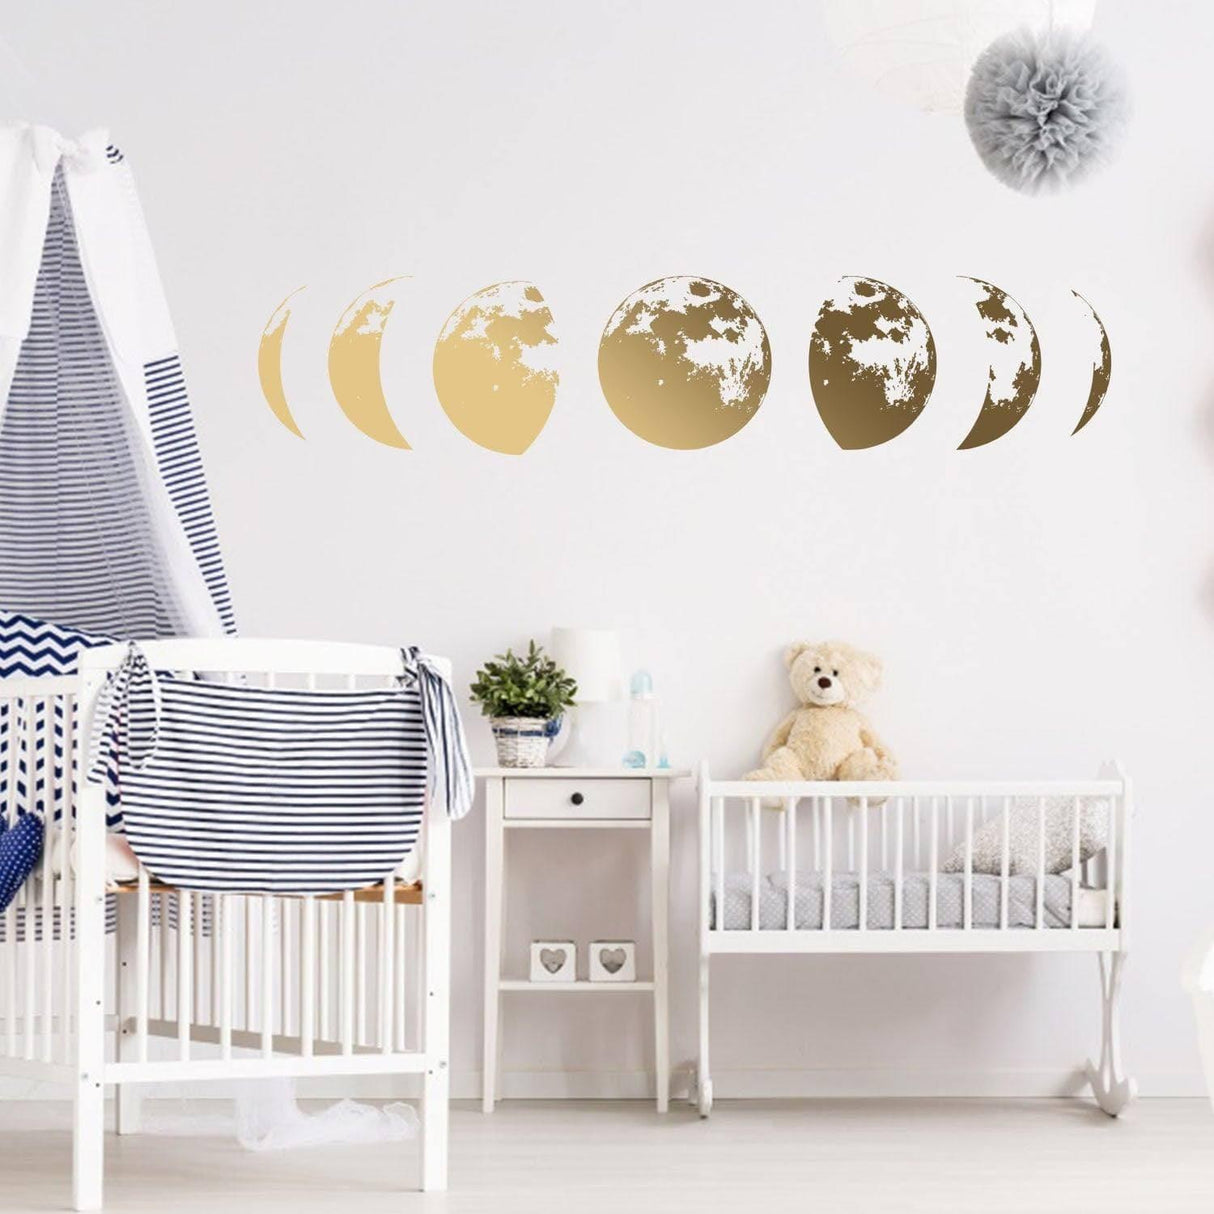 Moon Phases Wall Decor Decal - Gold Home Art Living Room Bedroom Sticker Decoration - Silver Phase Cycle Nursery Lunar Crescent Vinyl Mural - Decords